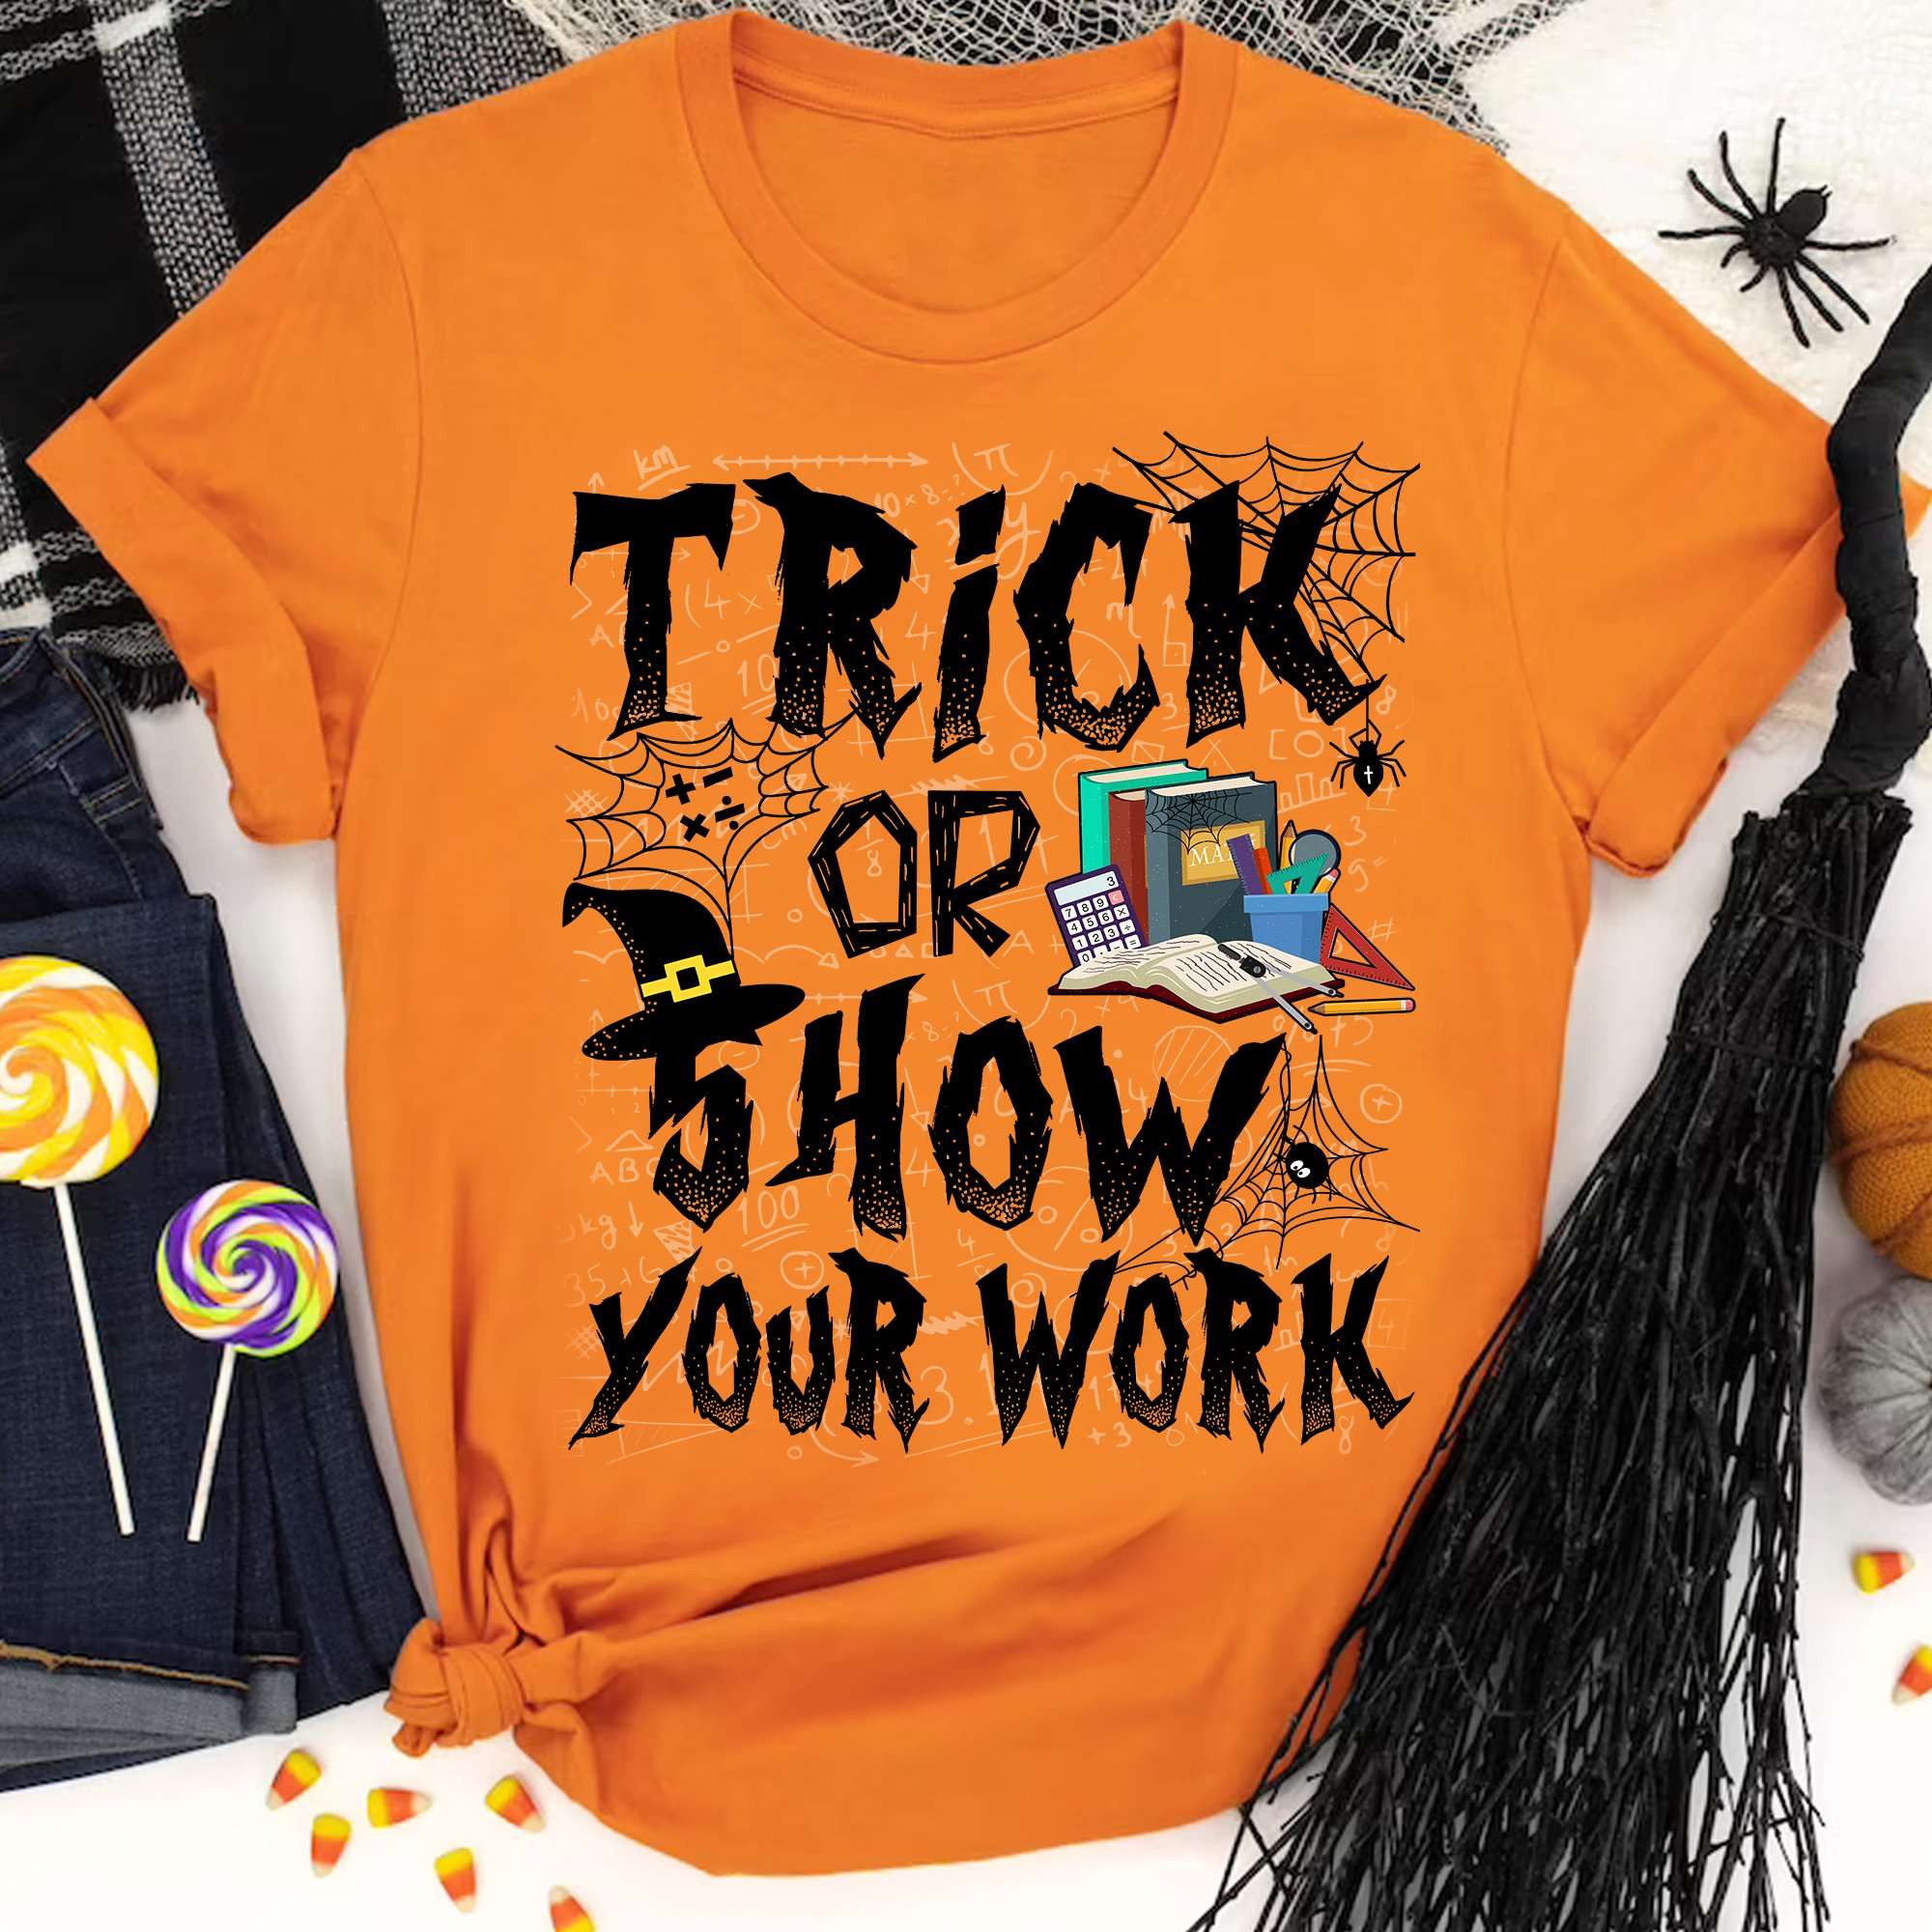 Trick or show your work - Teacher Halloween T-shirt, trick or treat game